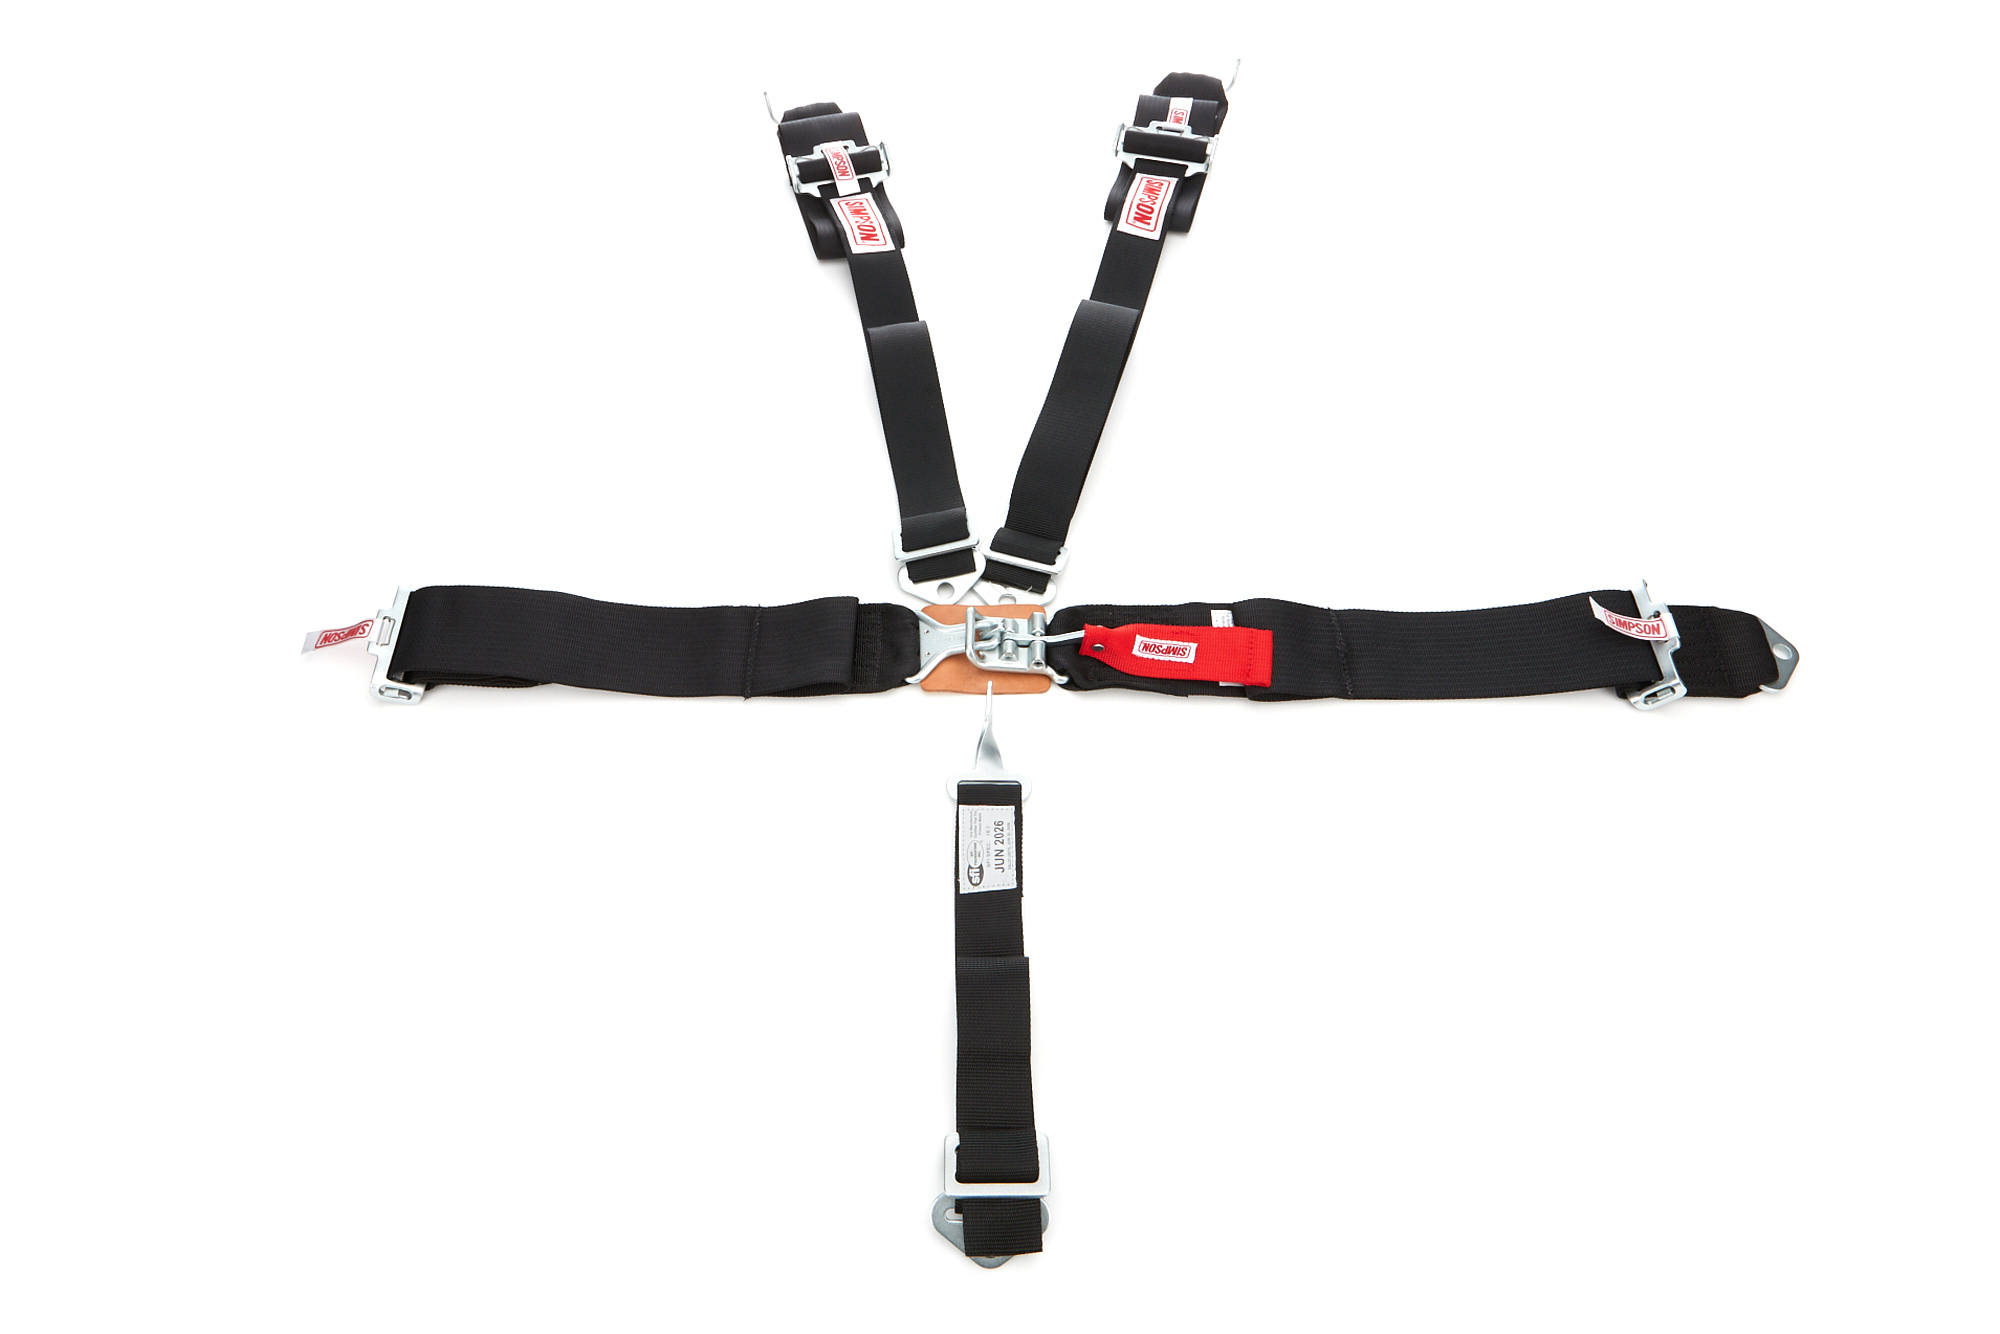 Harness - 5 Point - Latch and Link - SFI 16.1 - Pull Up Adjust - Bolt-On / Wrap Around - Individual Harness - Black - Kit